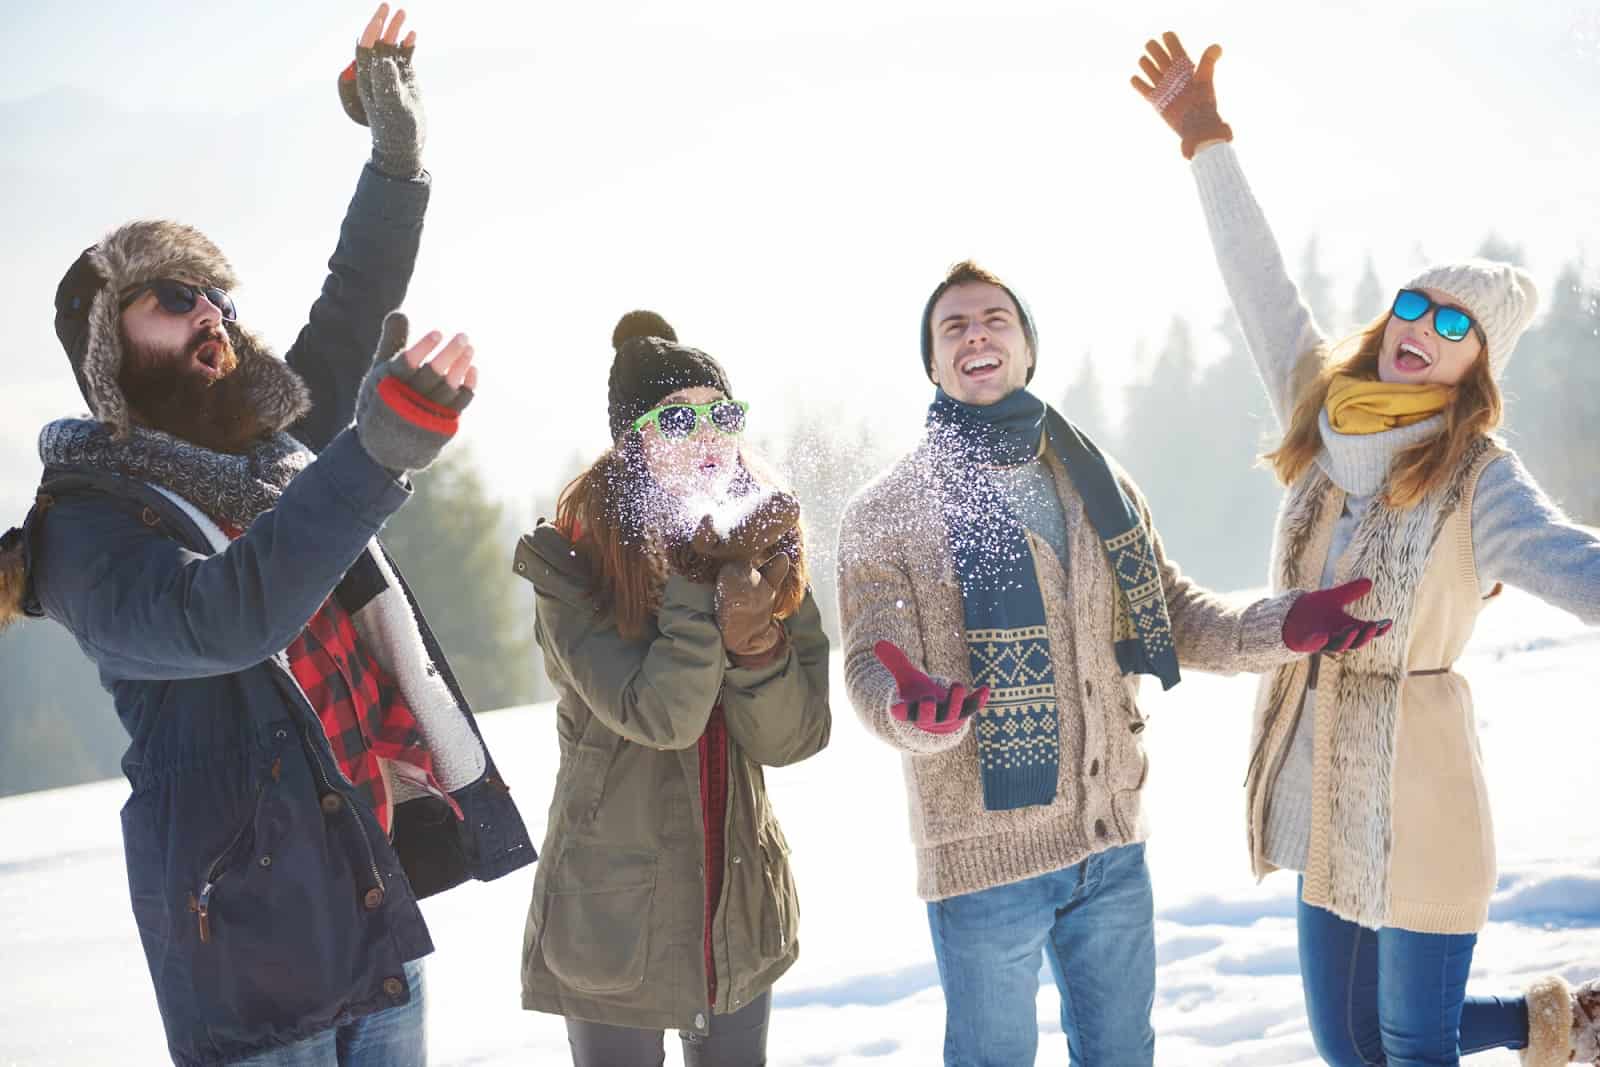 A group of people in warm clothes throw snow